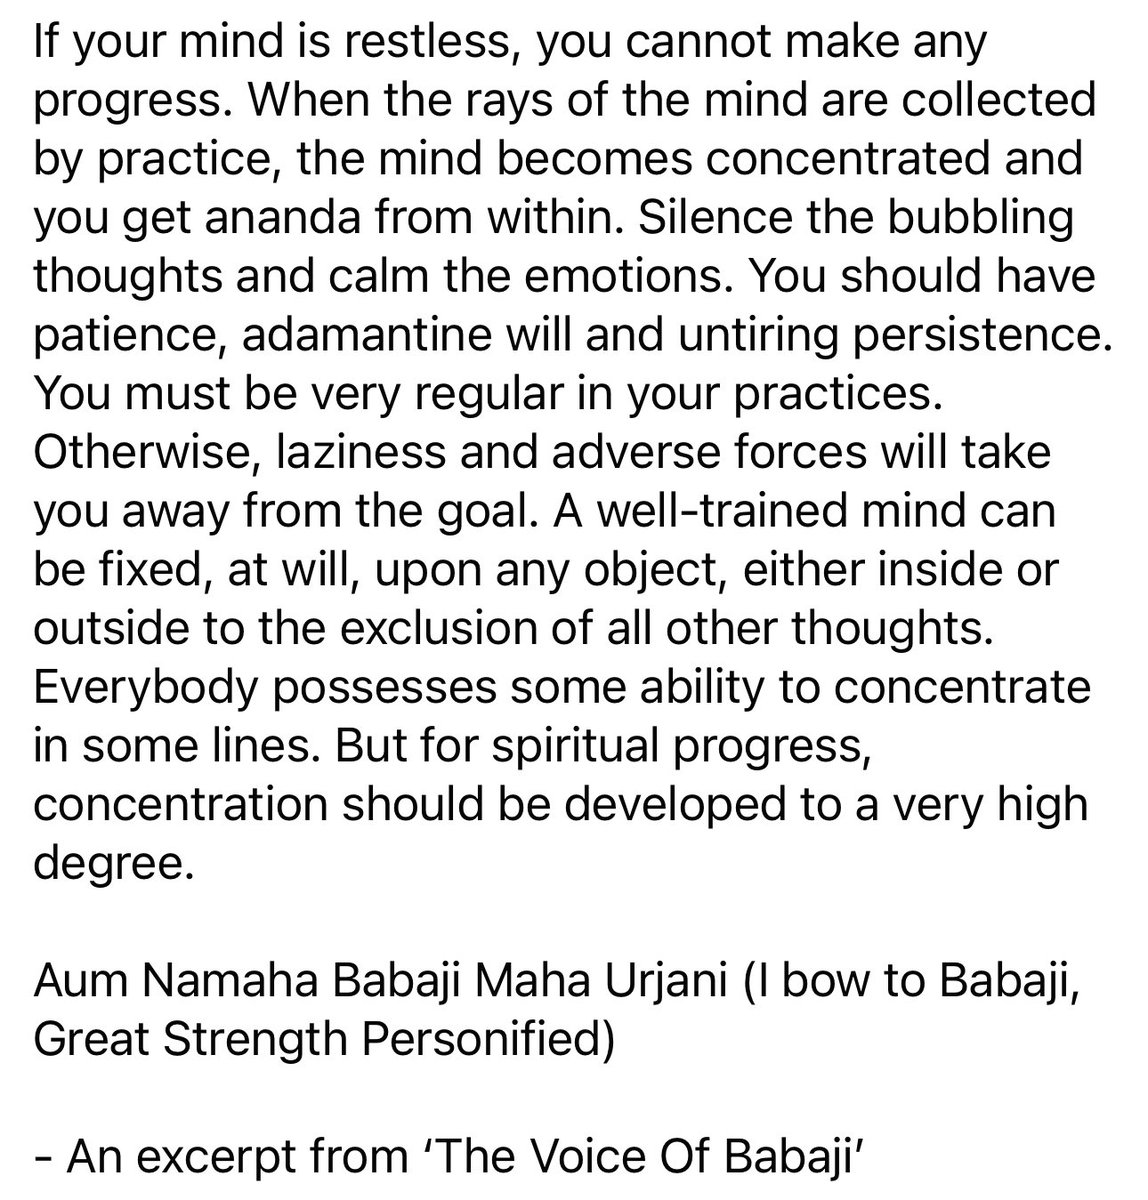 A well-trained mind can be fixed, at will, upon any object, either inside or outside to the exclusion of all other thoughts. Everyone possesses some ability to concentrate. But for spiritual progress, concentration should be developed to a very high degree. 
Om Babaji Om!